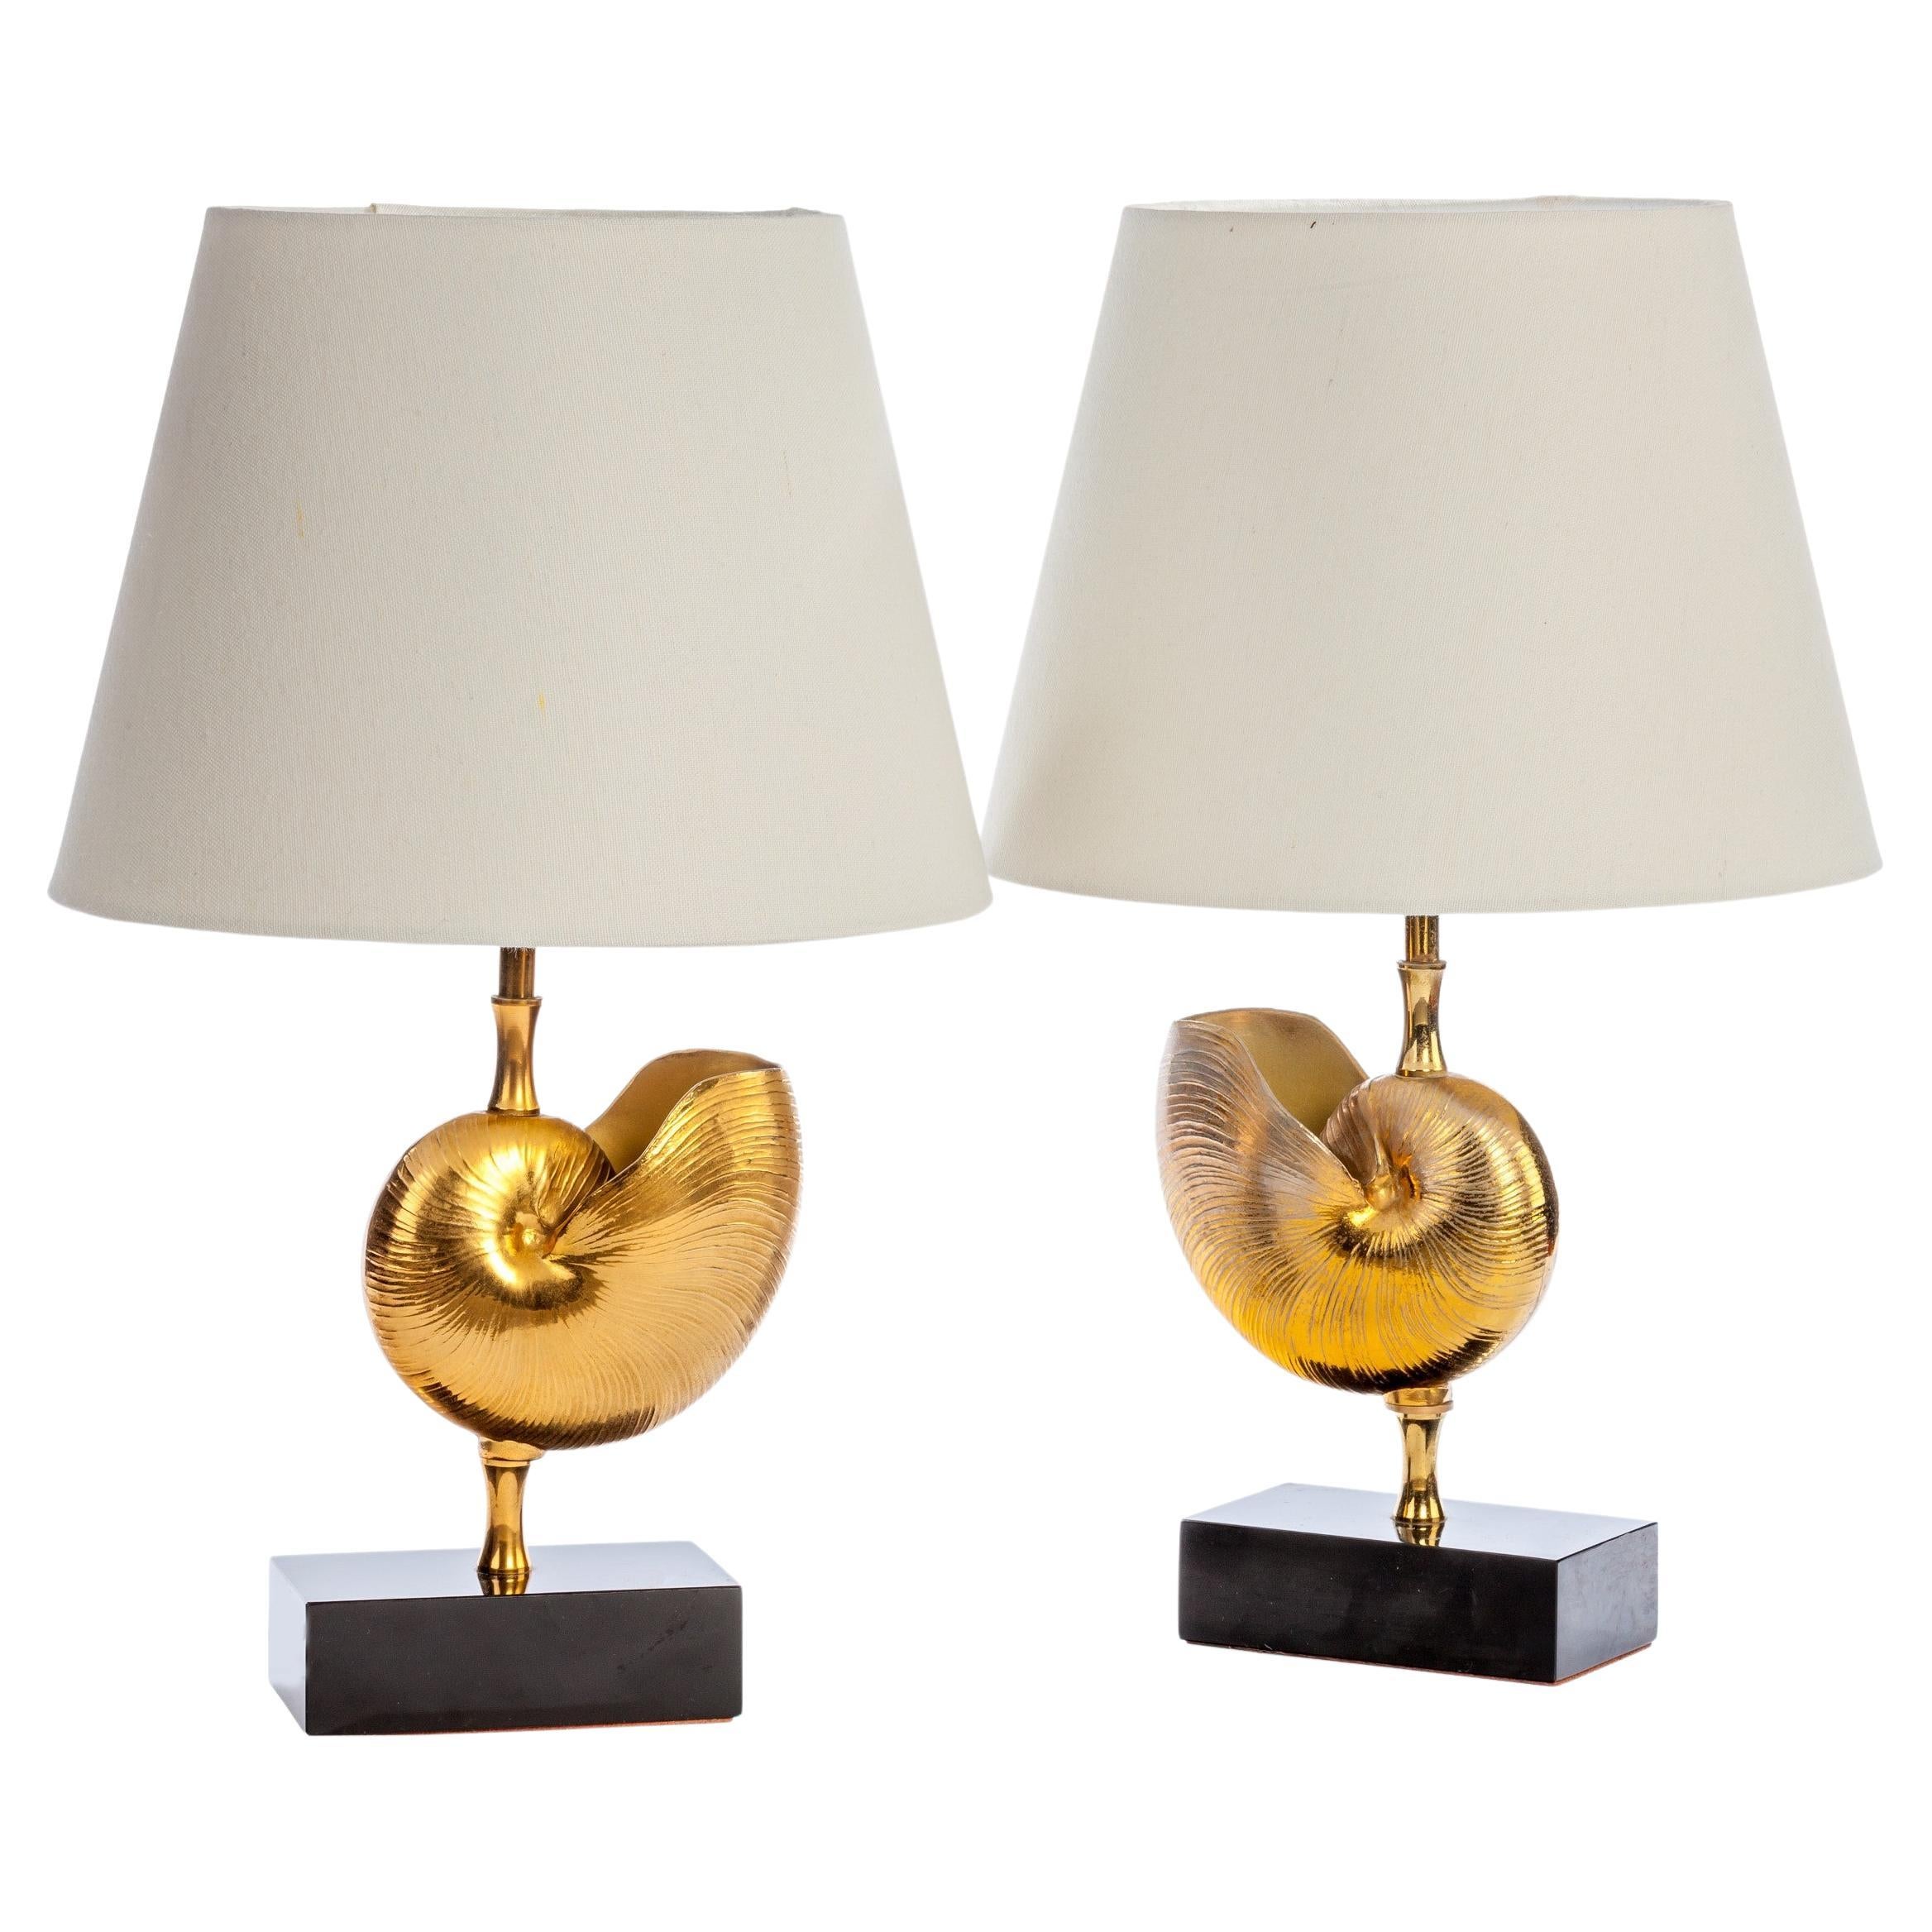 Pair of Mid-Century Modern Bronze Table Lamps Sitting on Marble Base